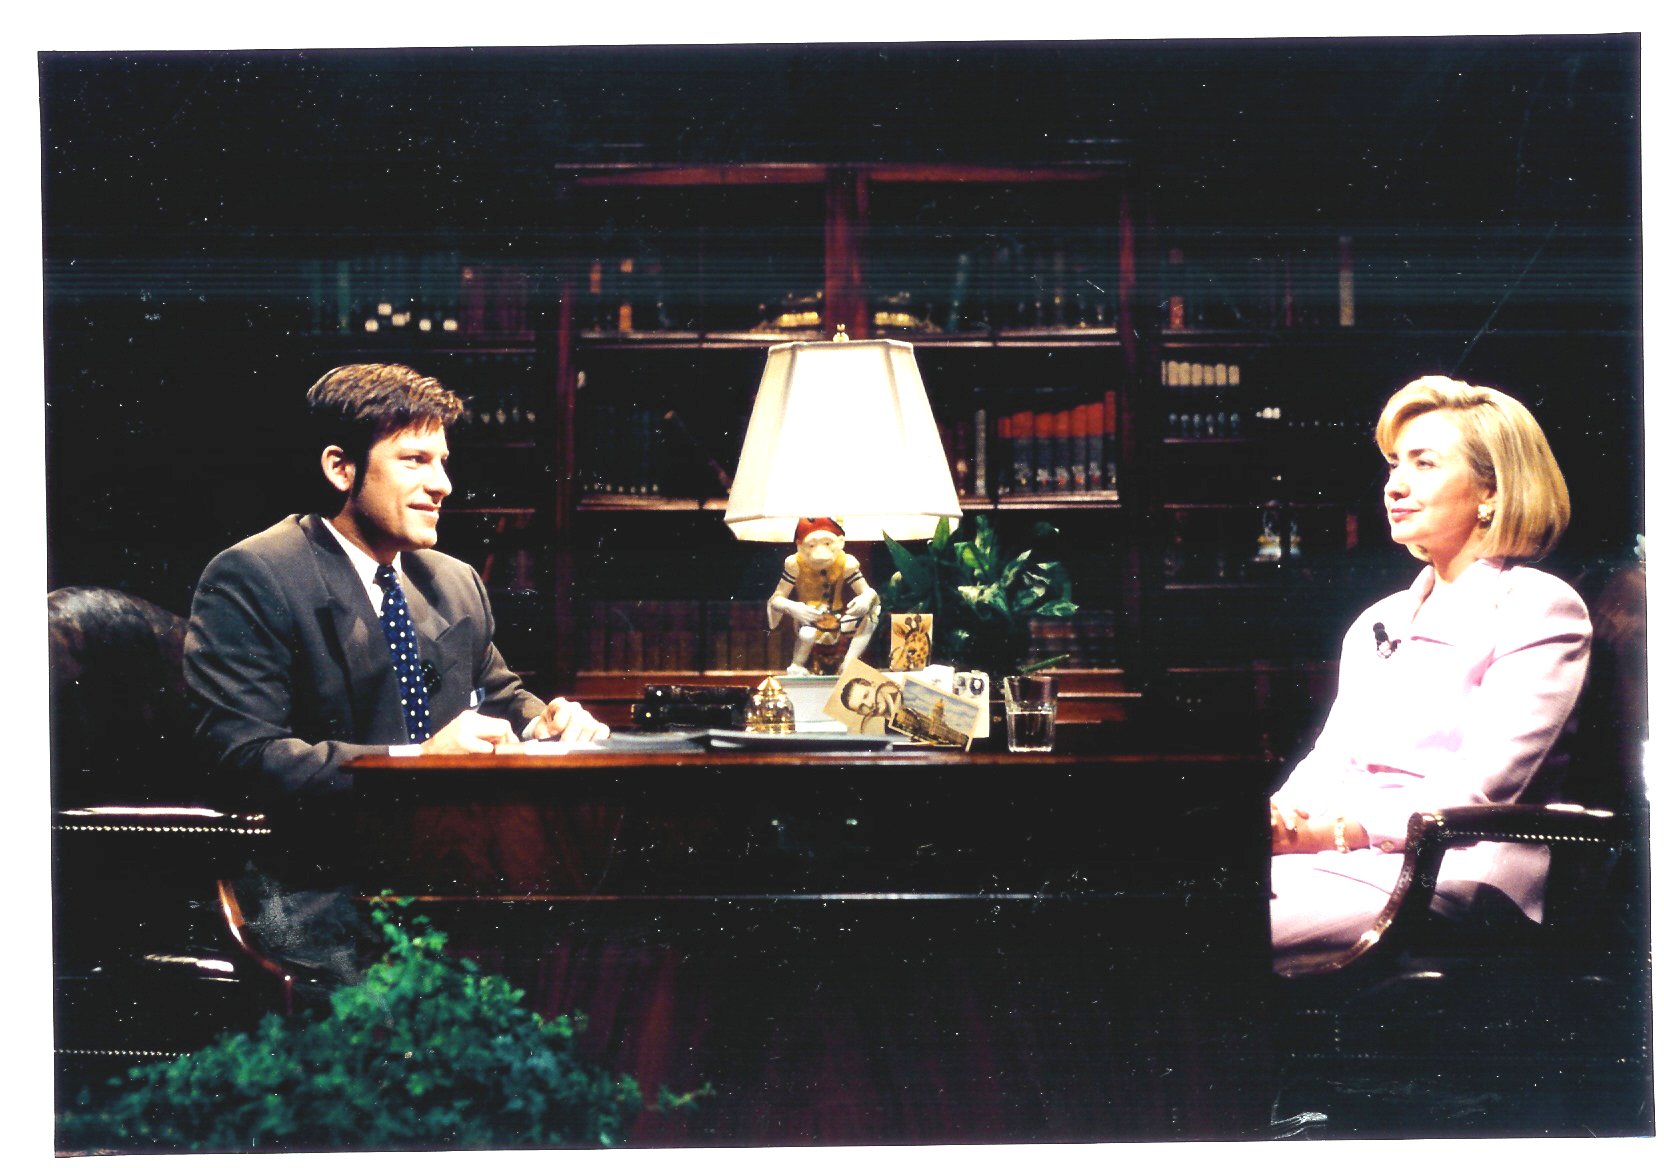 Hillary Clinton being interviewed by the author, 1997